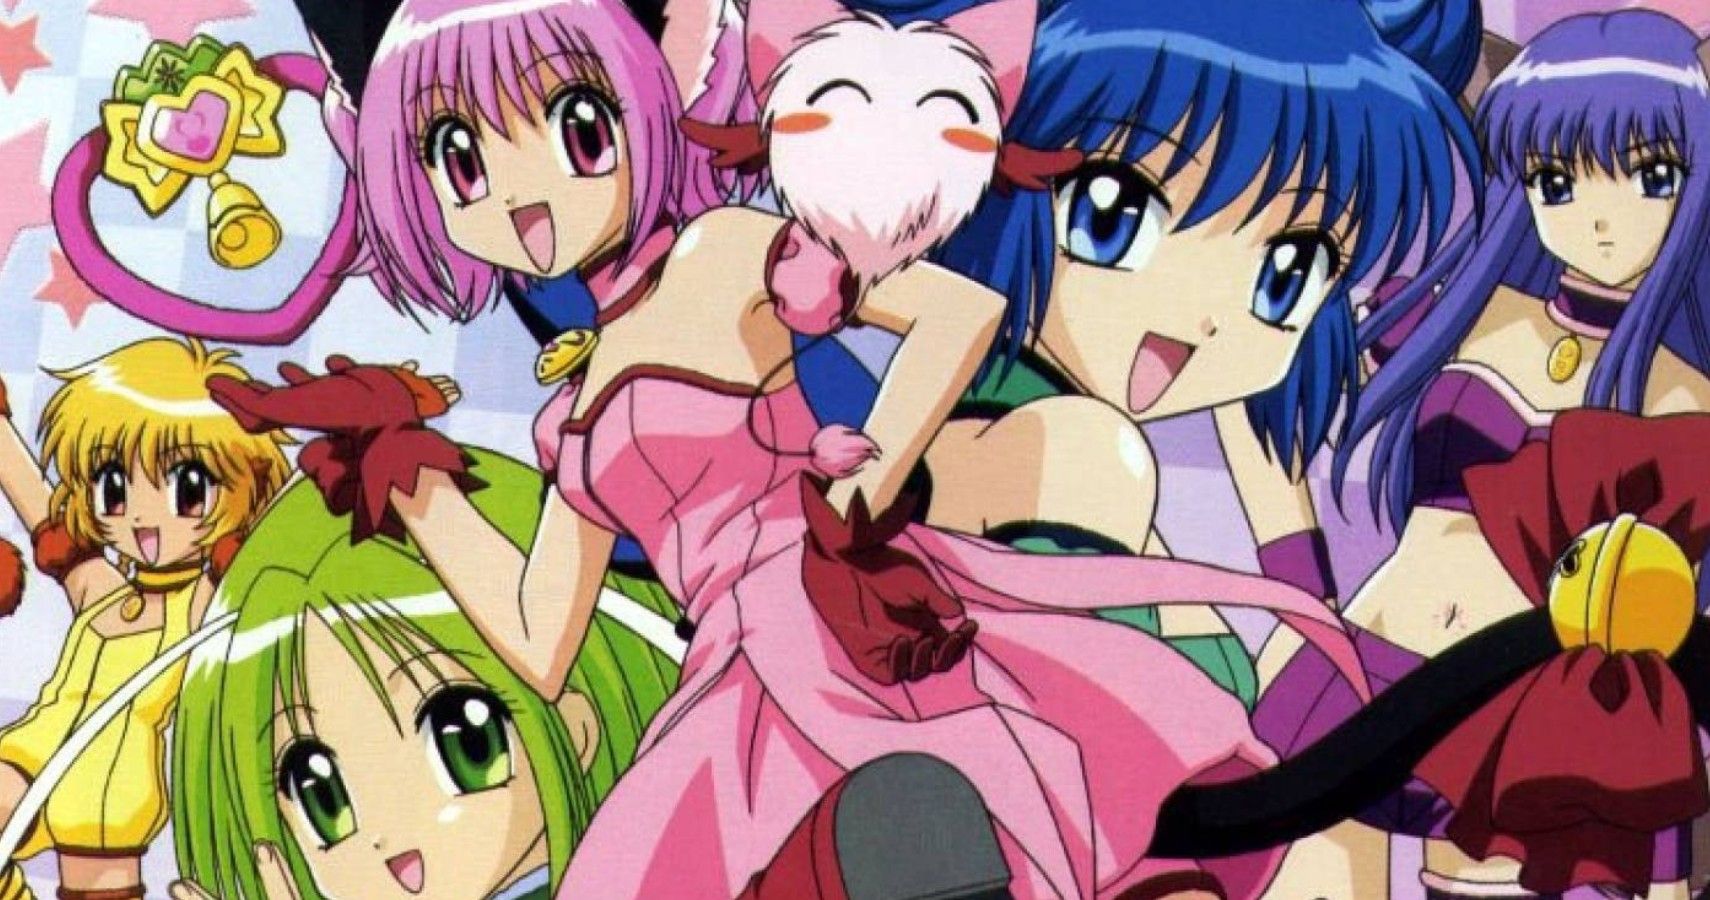 Is Tokyo Mew Mew finished?